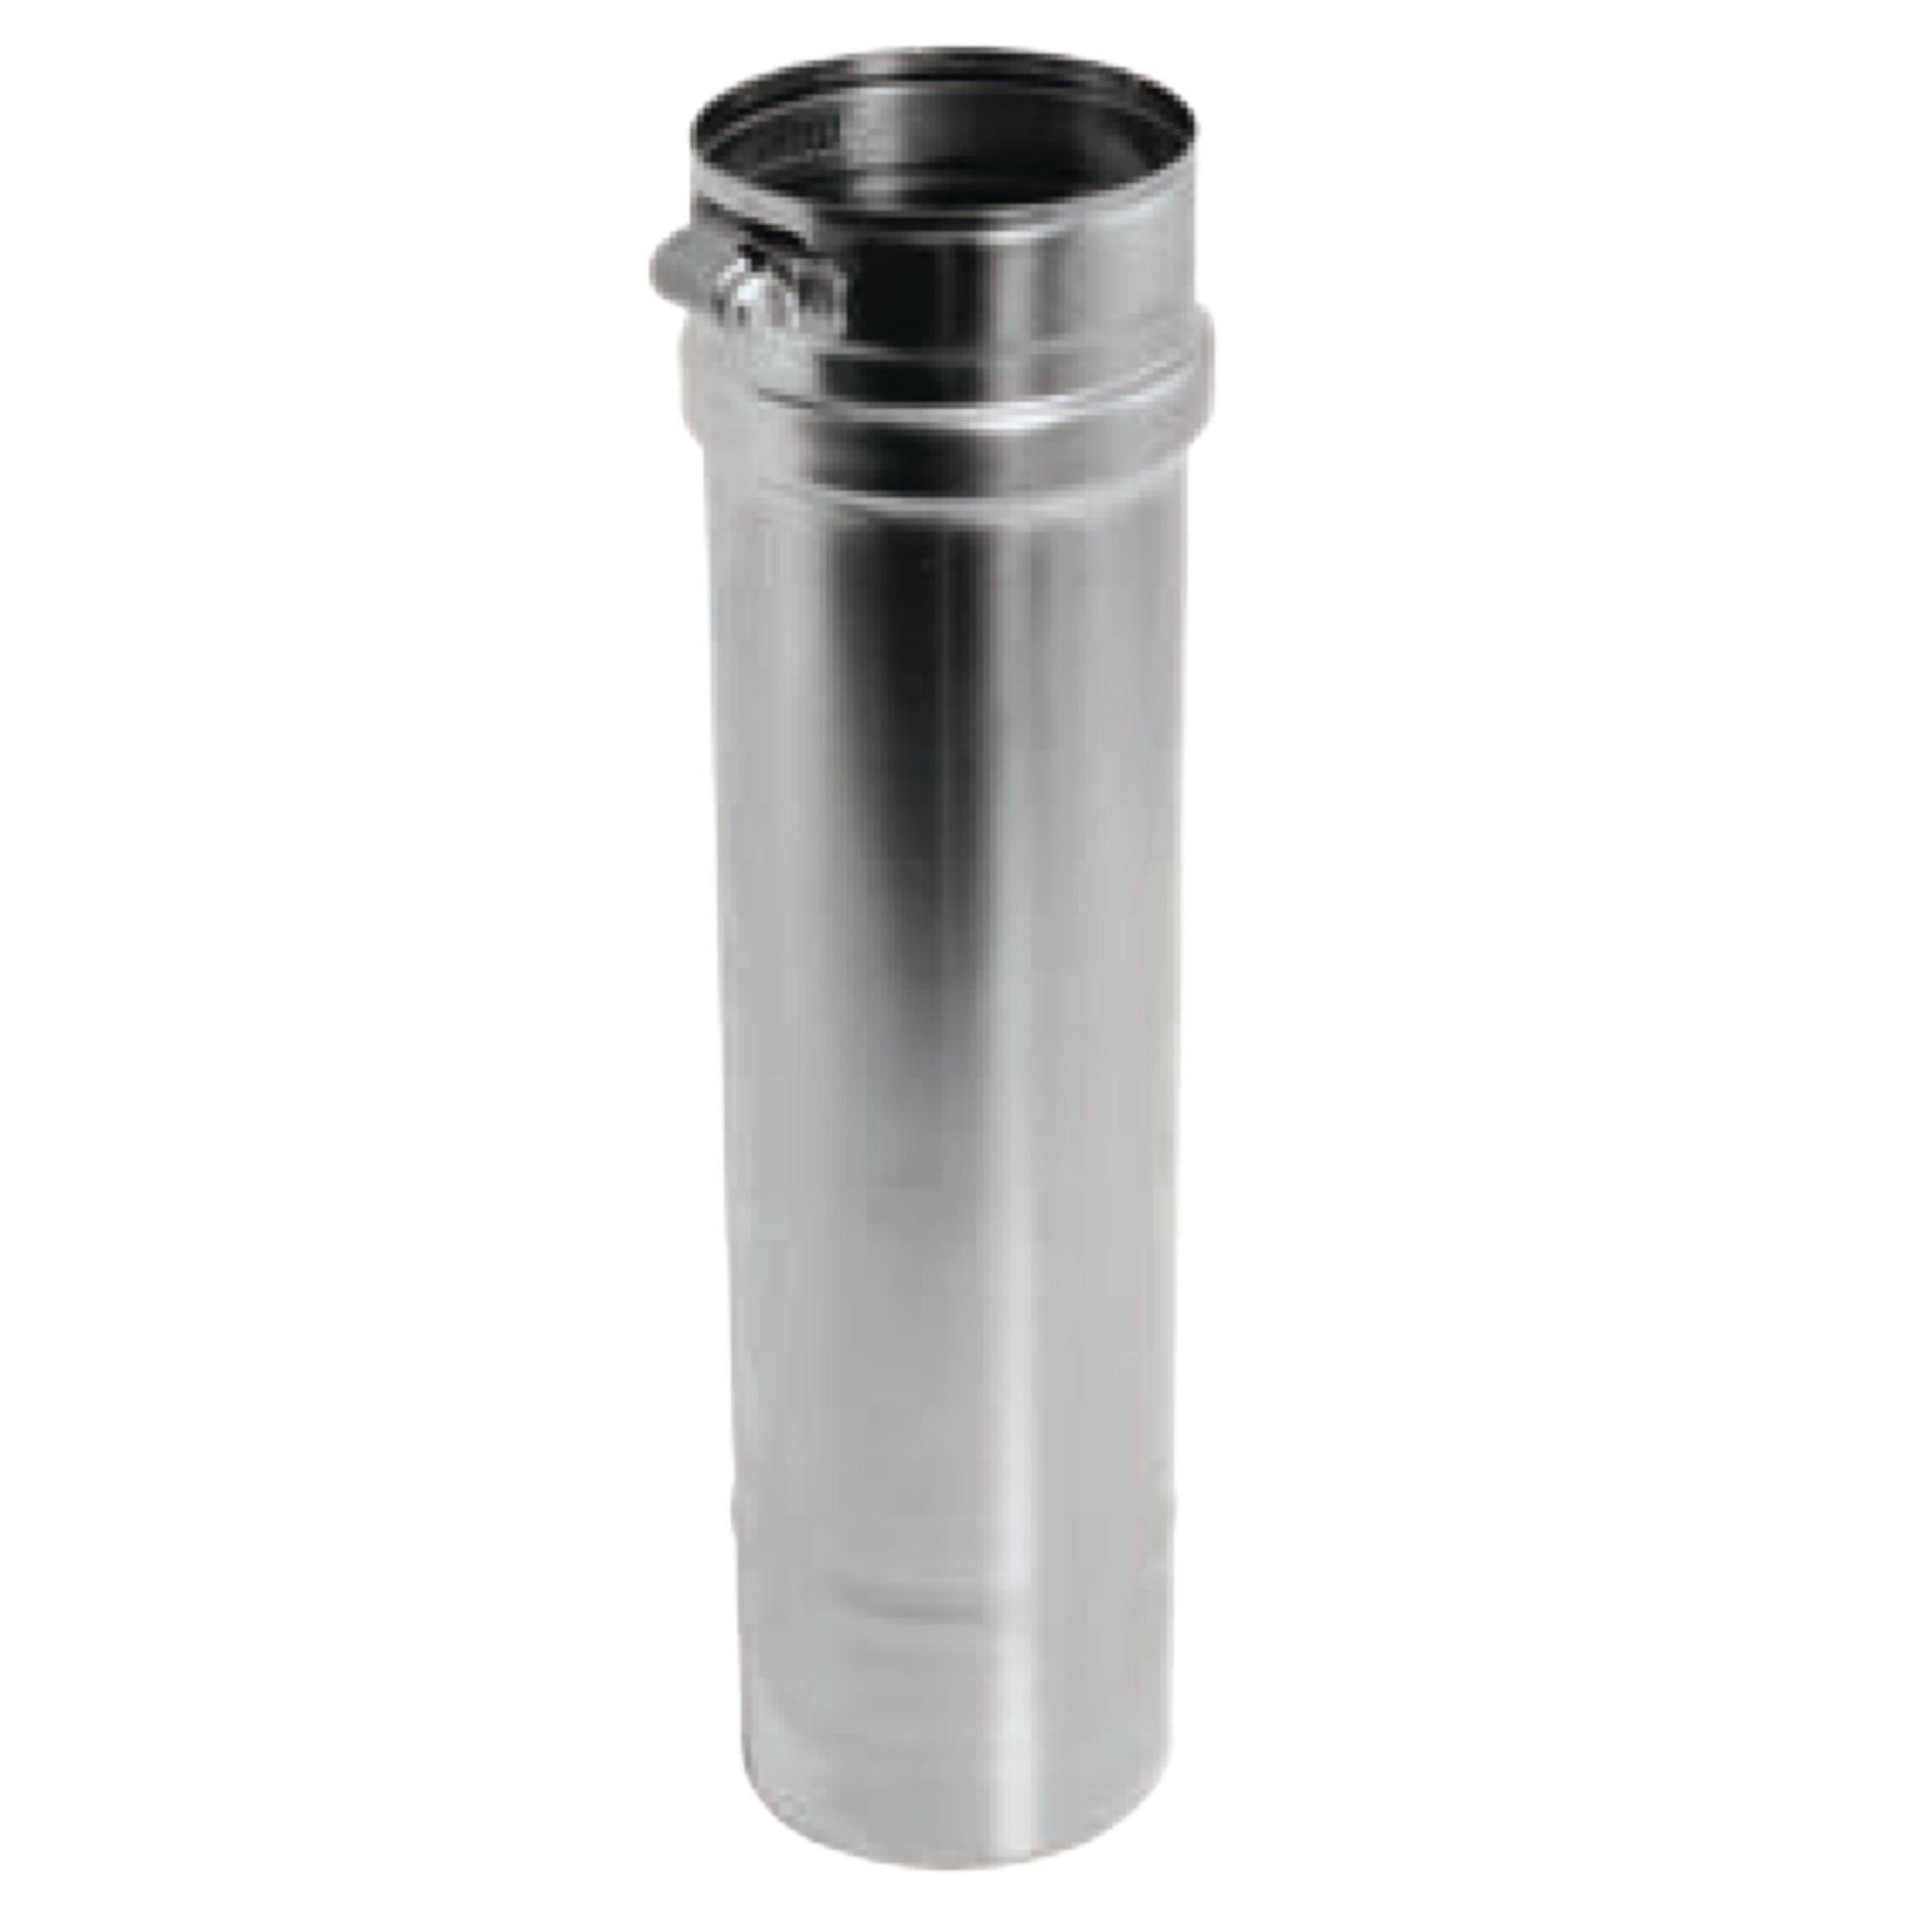 DuraVent FasNSeal 8" x 18" 29-4C Stainless Steel Vent Length